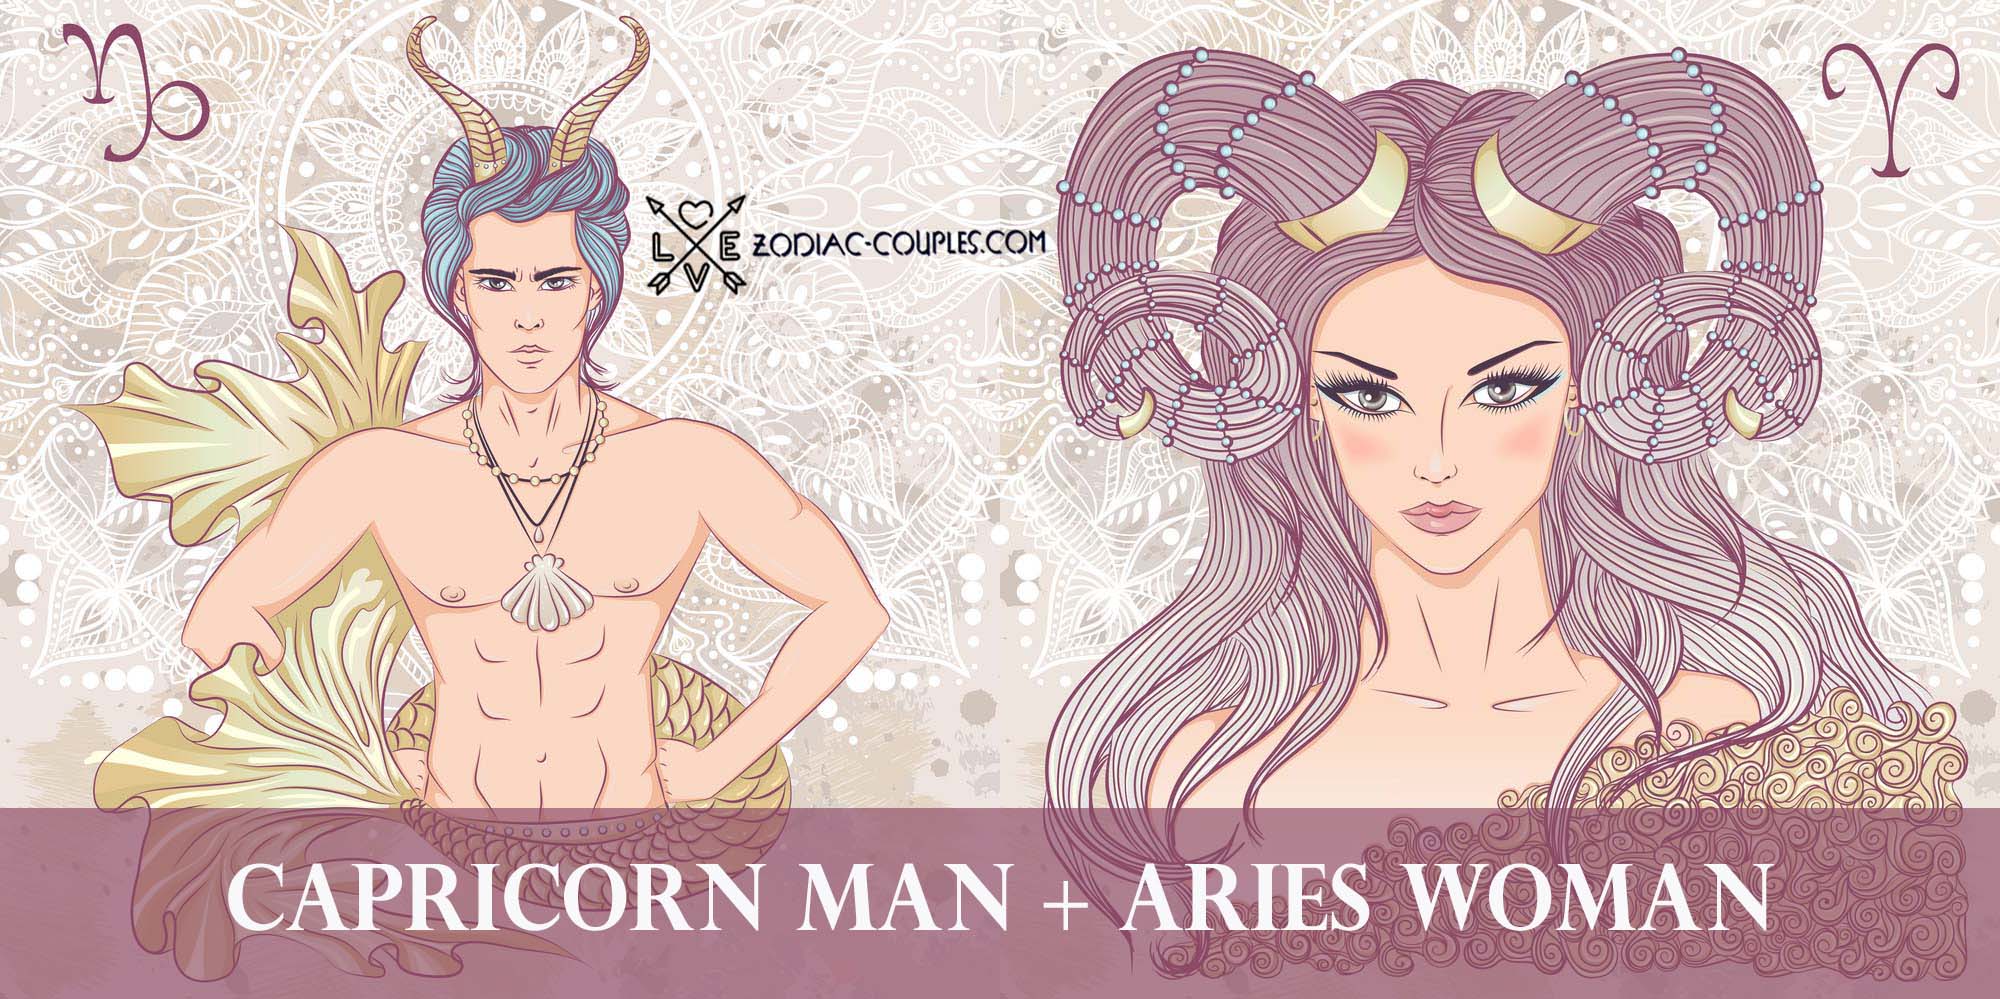 Capricorn man and Aries woman: Celebrity Couples and Compatibility ♑ ♈.